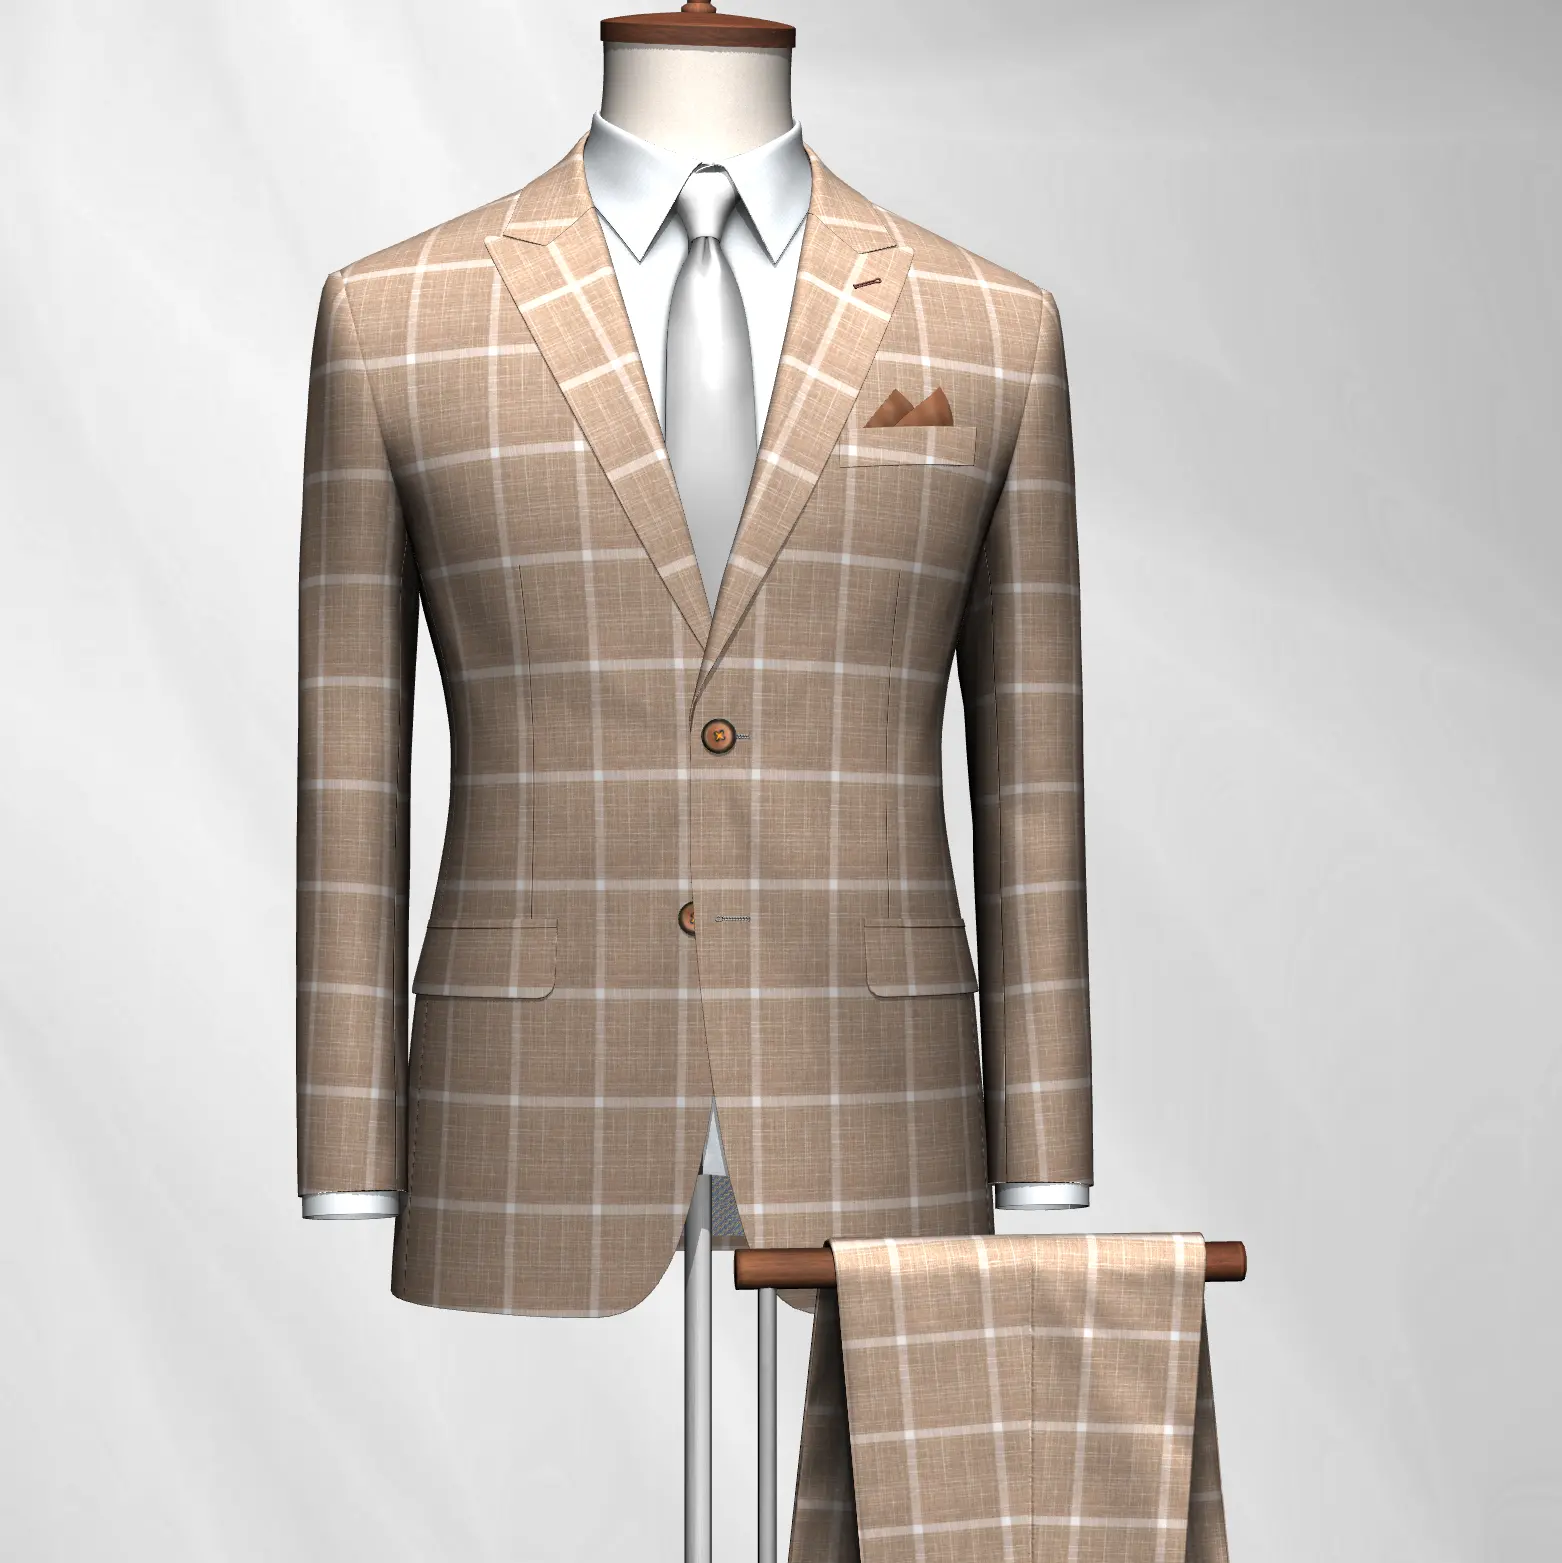 New design Italian style polyester viscose spandex blend men's checked jacquard suit fabric comfortable jacket fabric